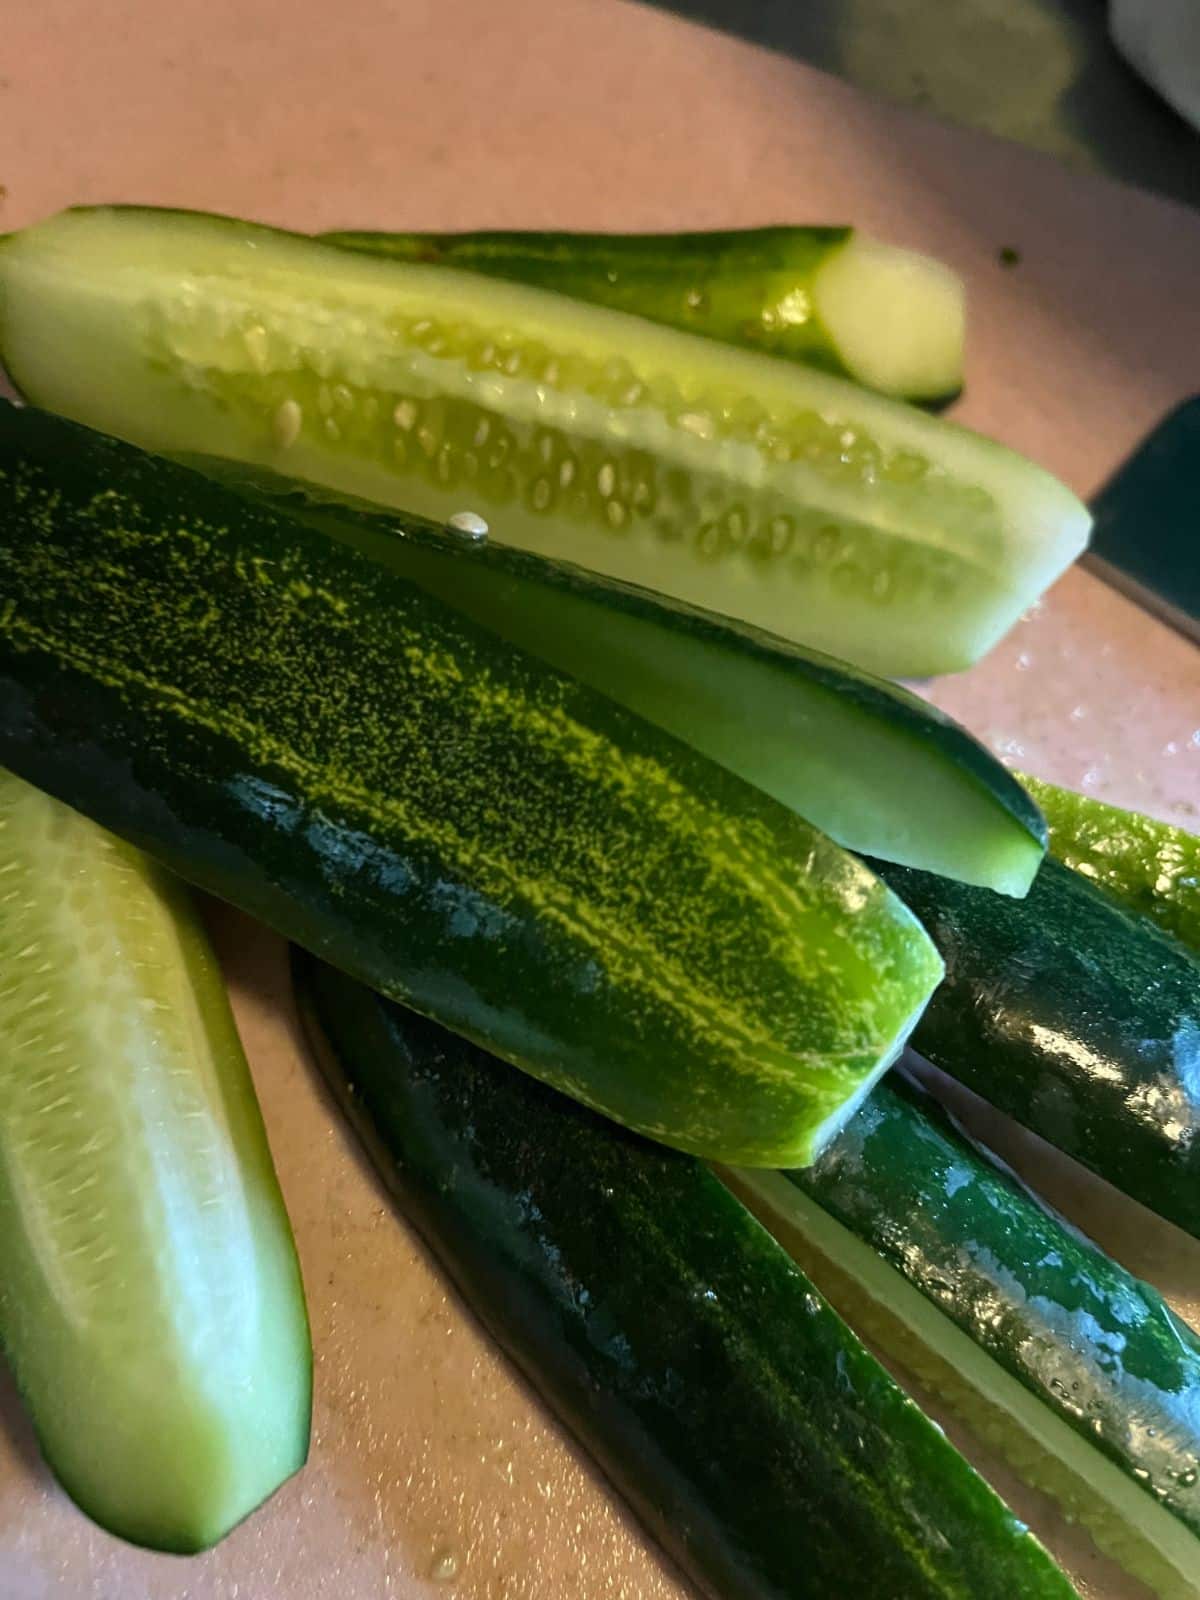 Cucumbers cut and prepped for pickling